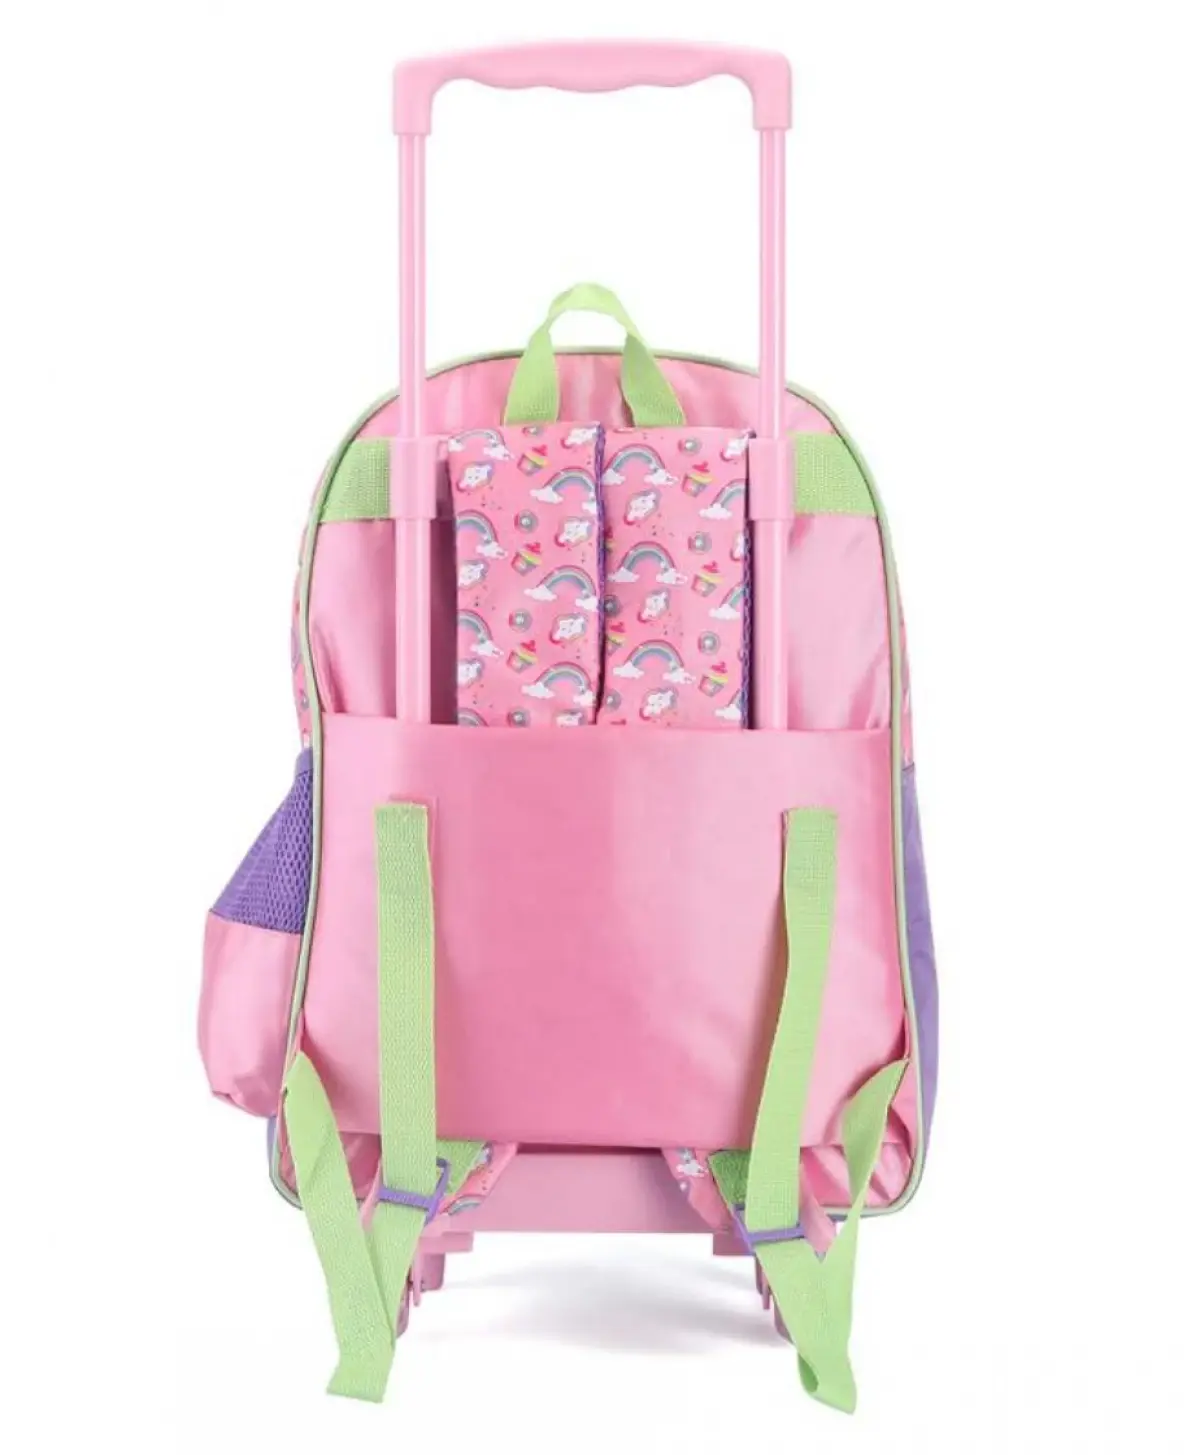 Striders 18 inches Barbie School Trolley Bag Dreams in Style for Little Fashionistas Multicolor For Kids Ages 8Y+